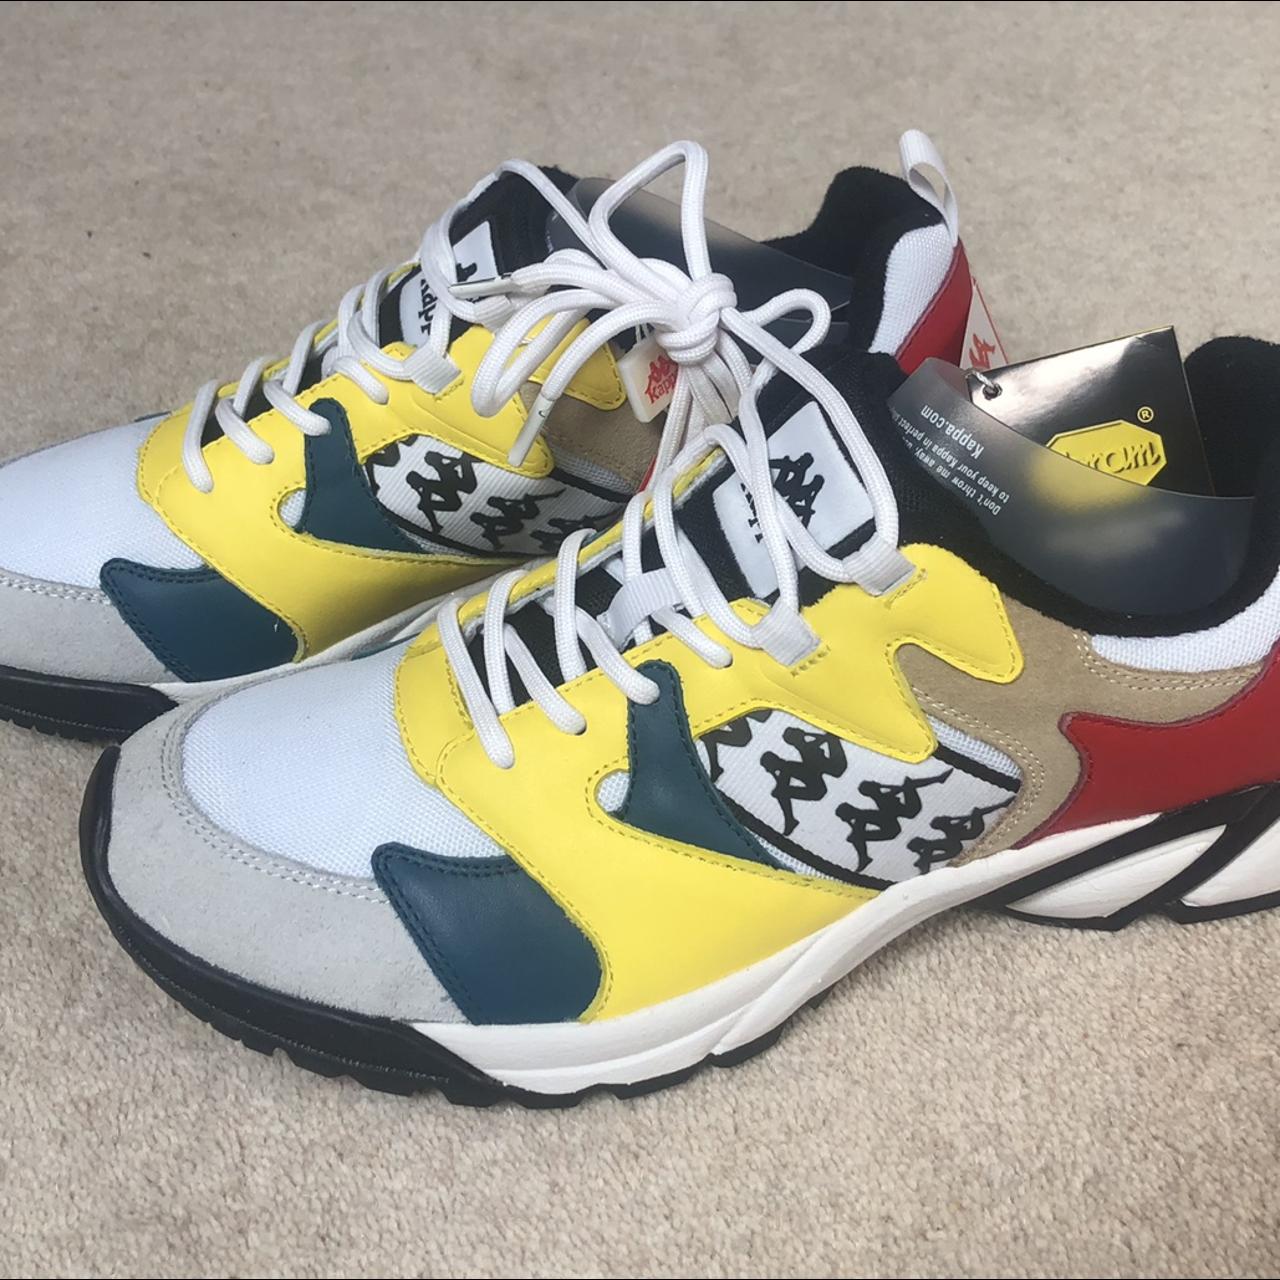 trainers/shoes Depop - multi colour with... Brand Kappa new